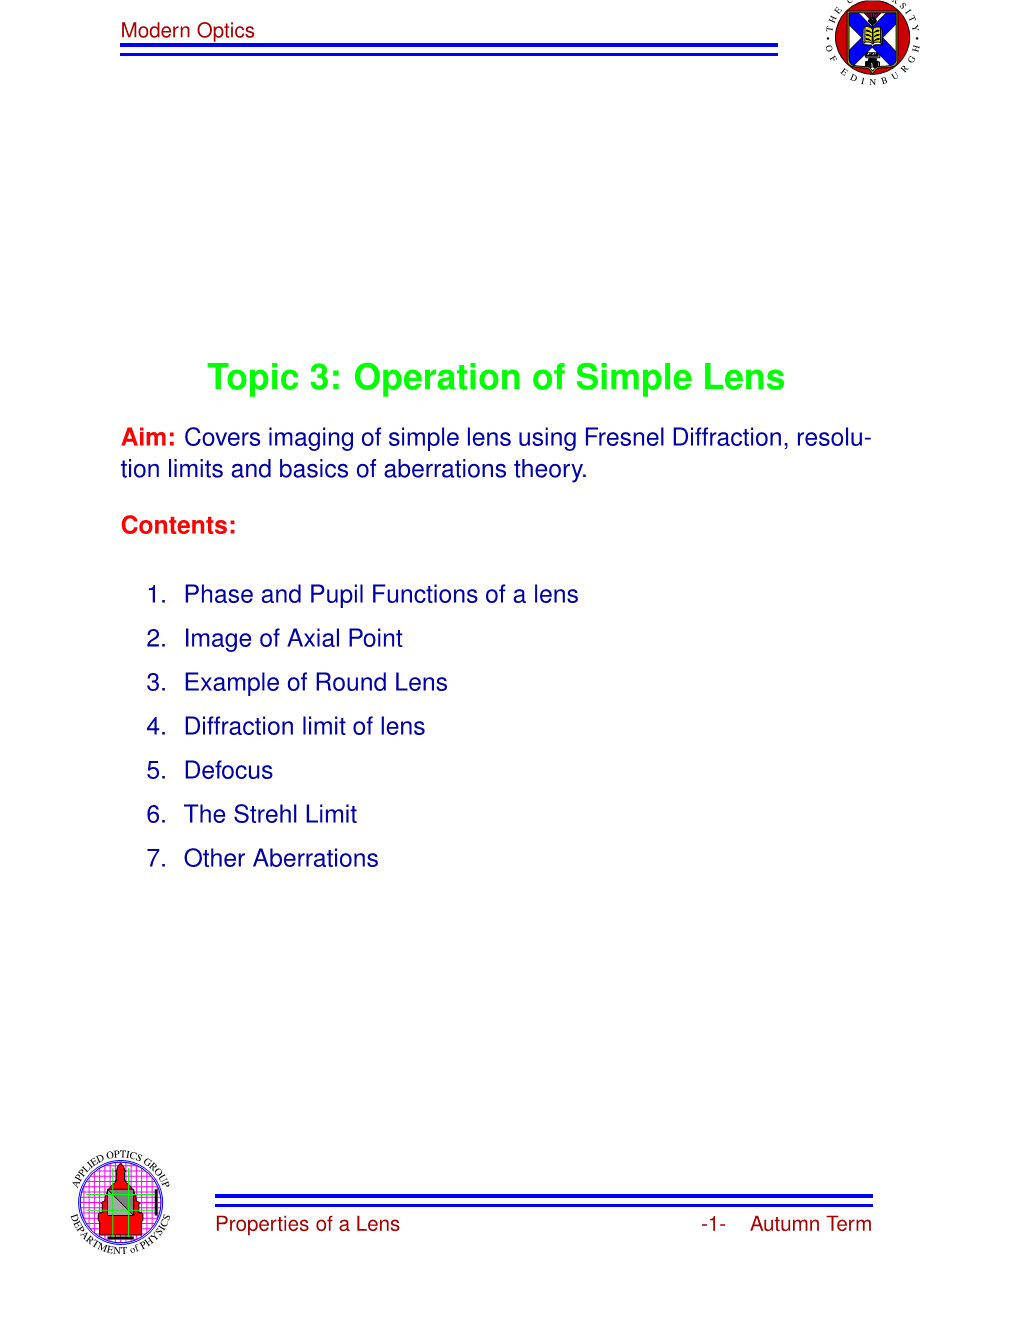 Topic 3: Operation of Simple Lens